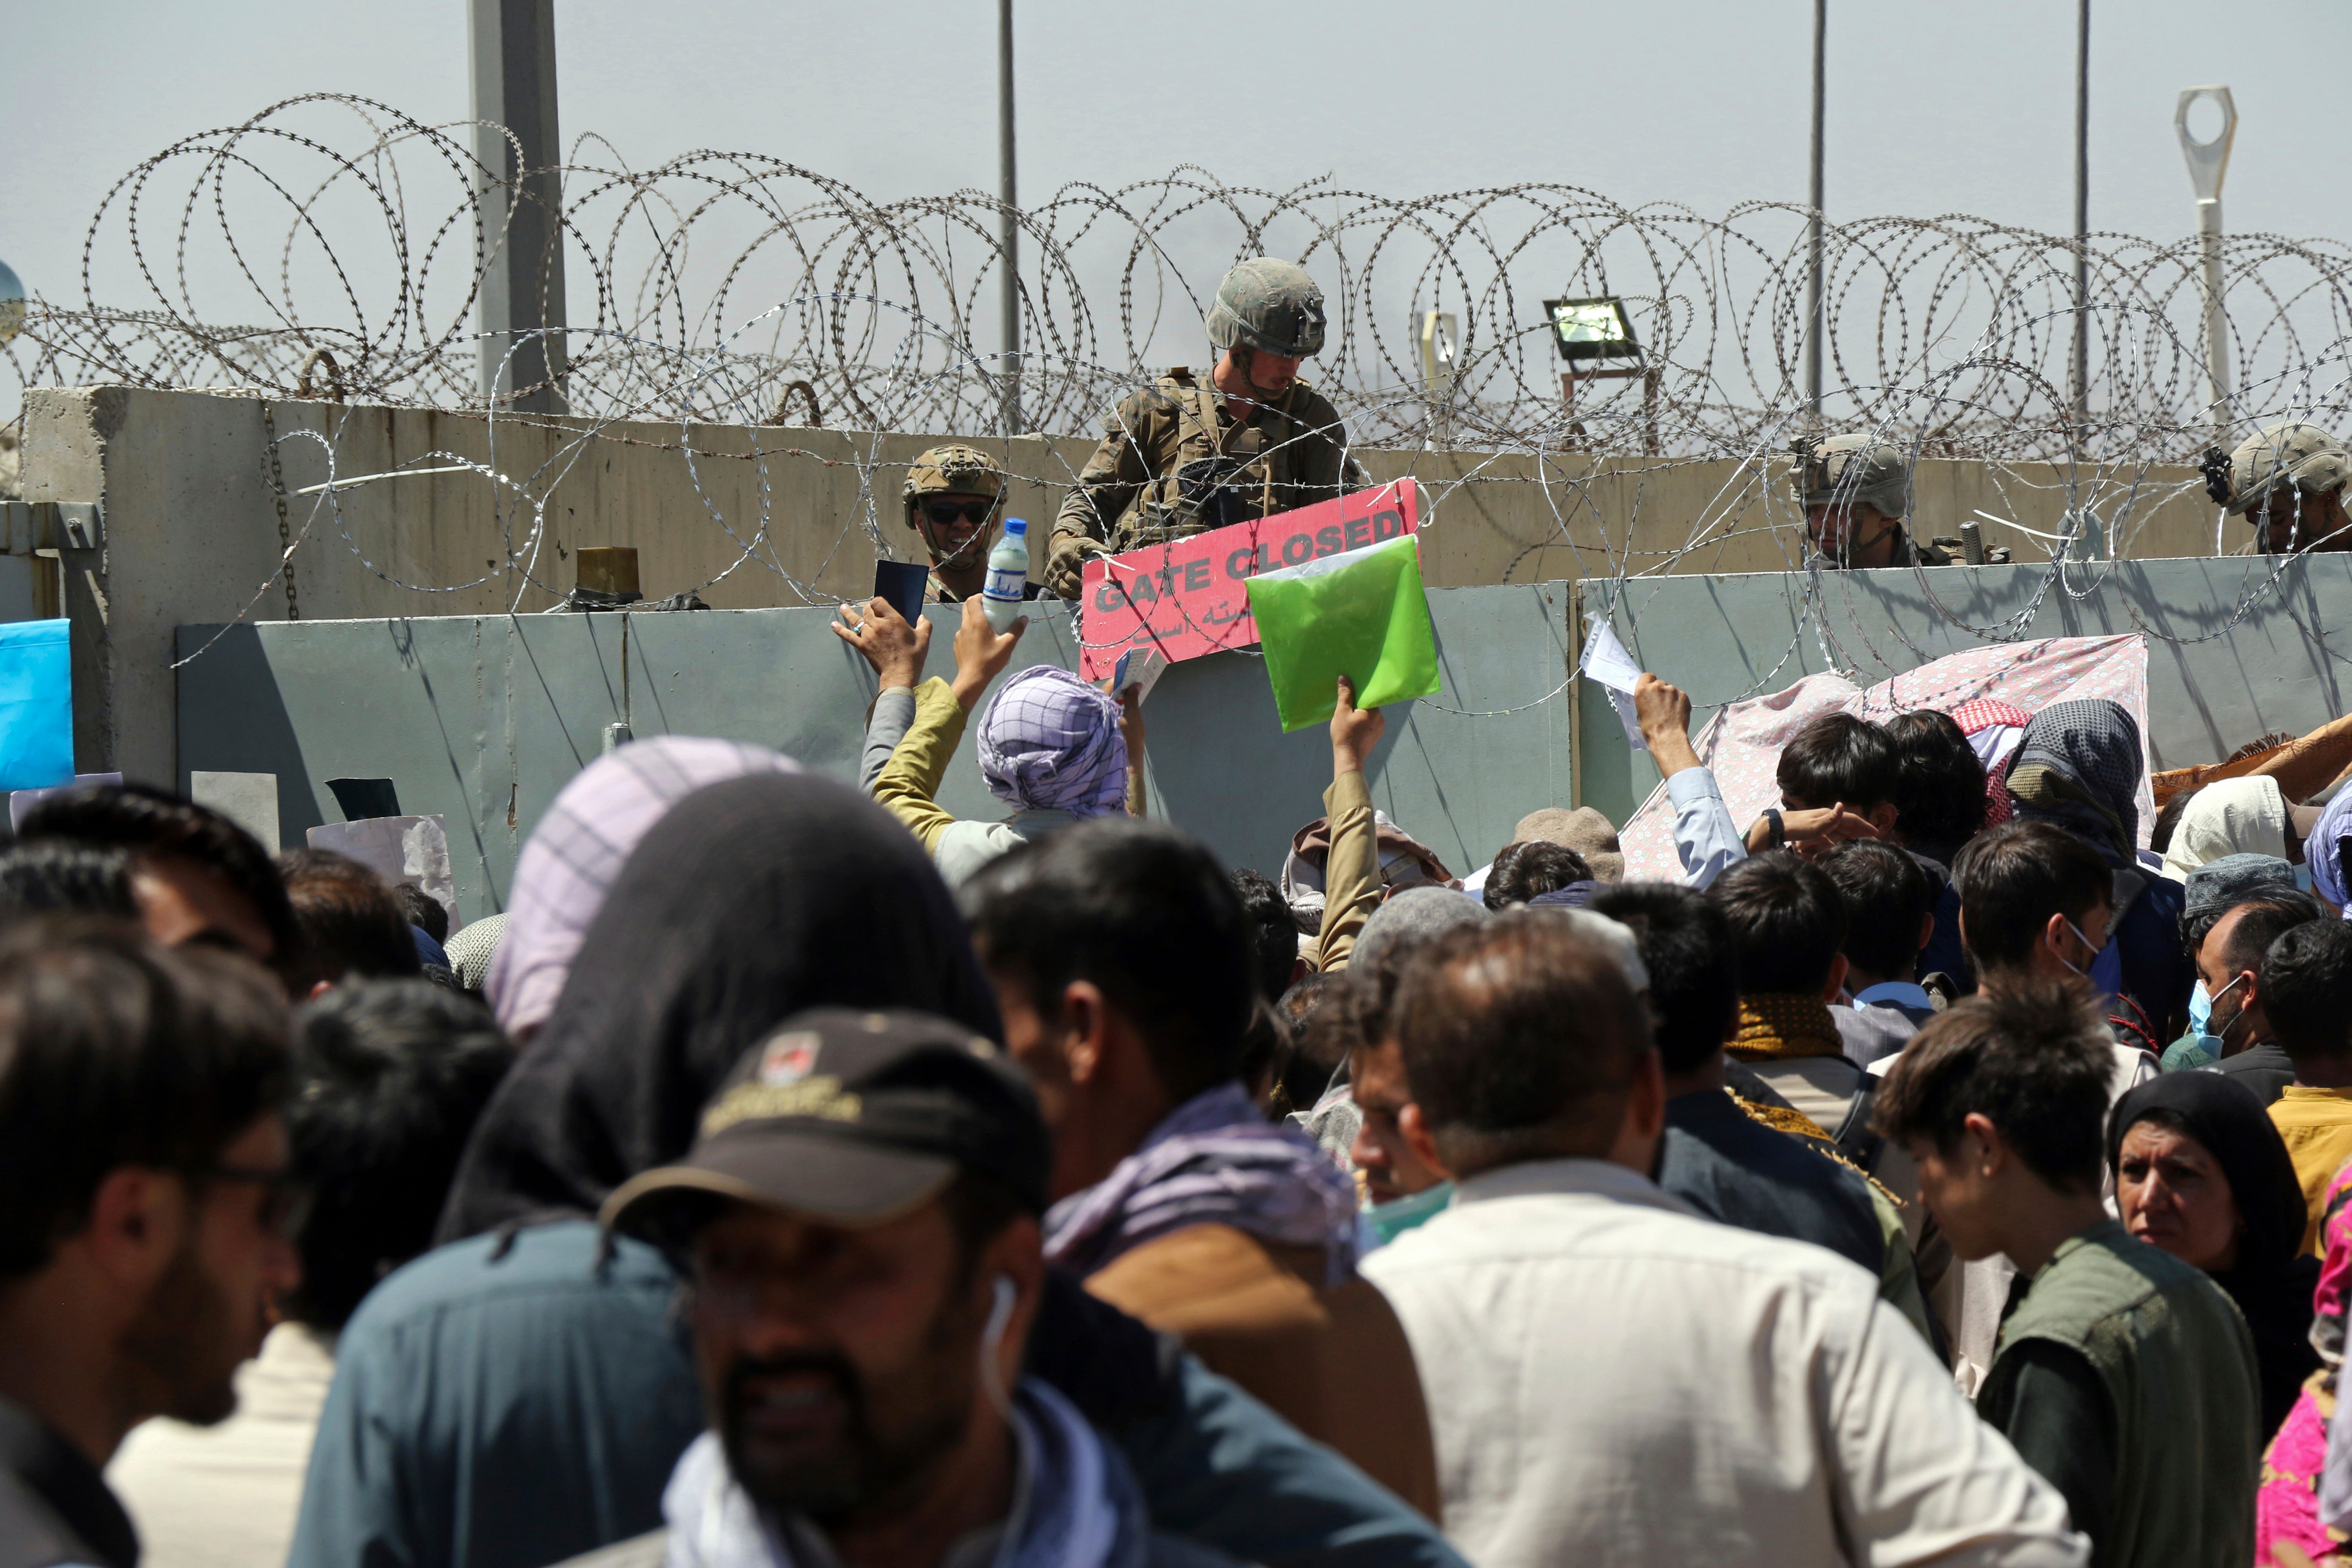 A U.S. soldier holds a sign indicating a gate is closed as hundreds of people gather some holding documents, near an evacuation control checkpoint on the perimeter of the Hamid Karzai International Airport, in Kabul, Afghanistan, Thursday, Aug. 26, 2021. Western nations warned Thursday of a possible attack on Kabul’s airport, where thousands have flocked as they try to flee Taliban-controlled Afghanistan in the waning days of a massive airlift. Britain said an attack could come within hours. 